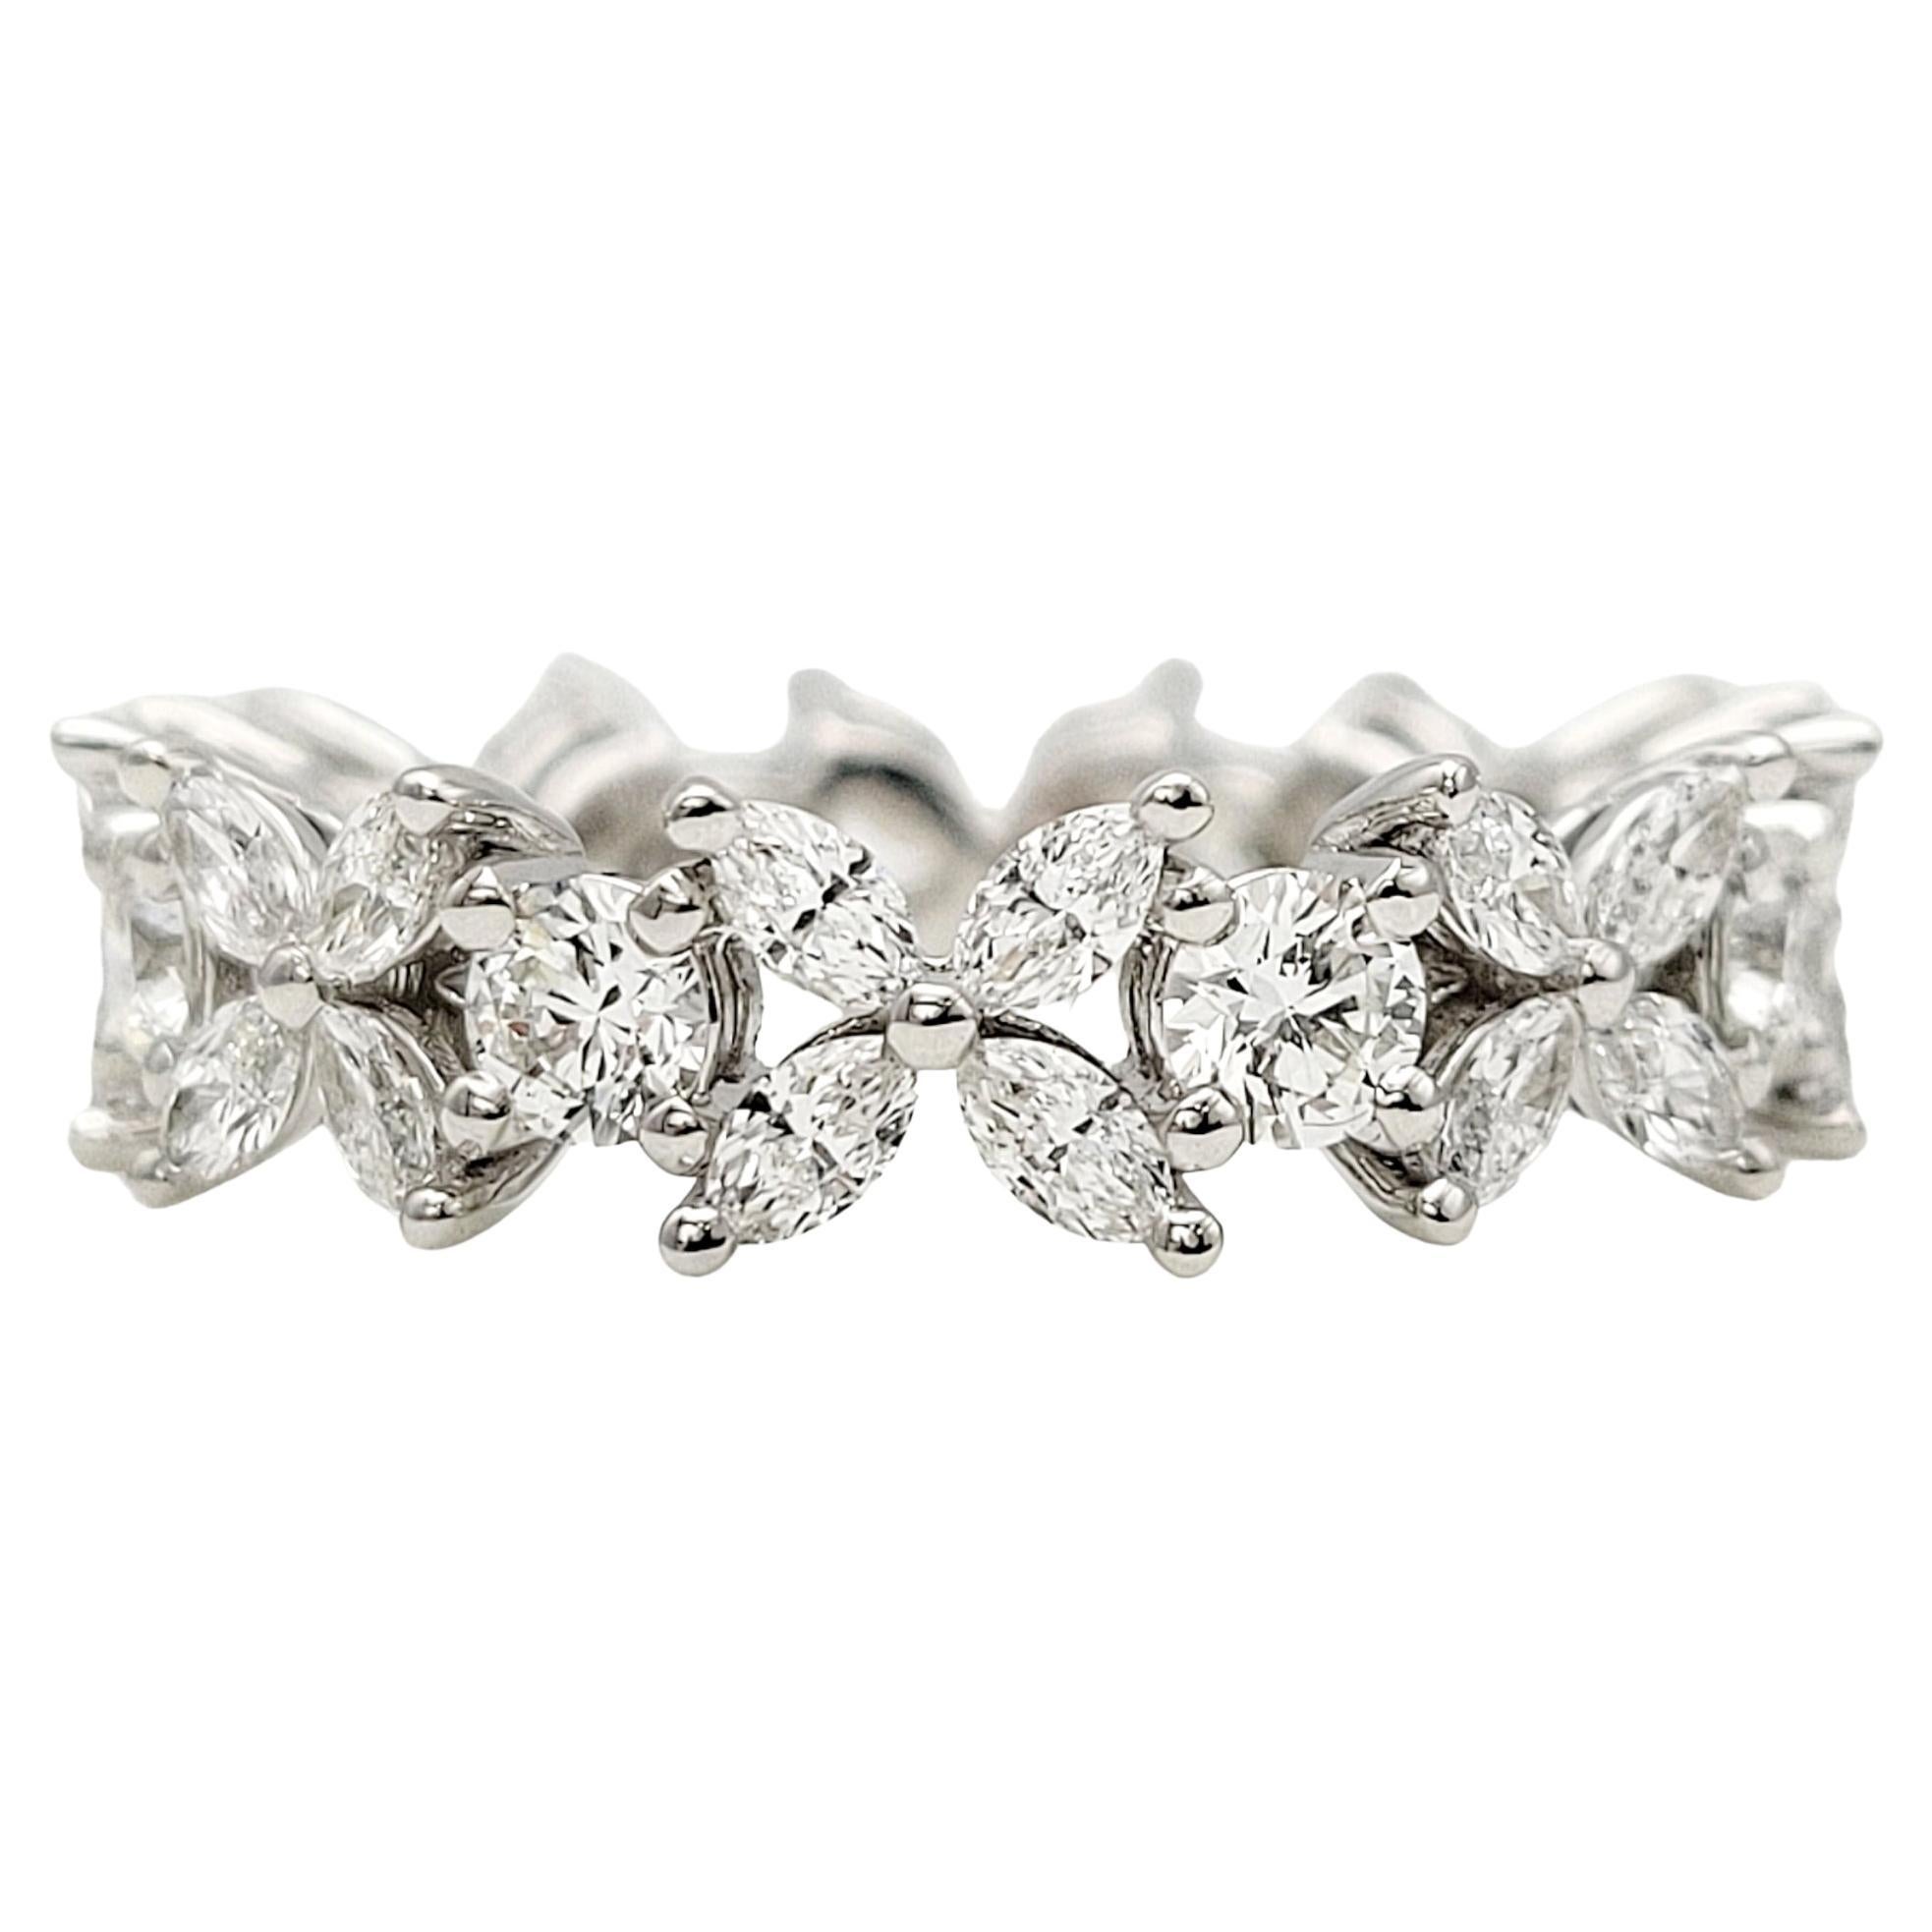 Tiffany & Co. Victoria Alternating 2.27 Carats Diamond Ring in Platinum For Sale